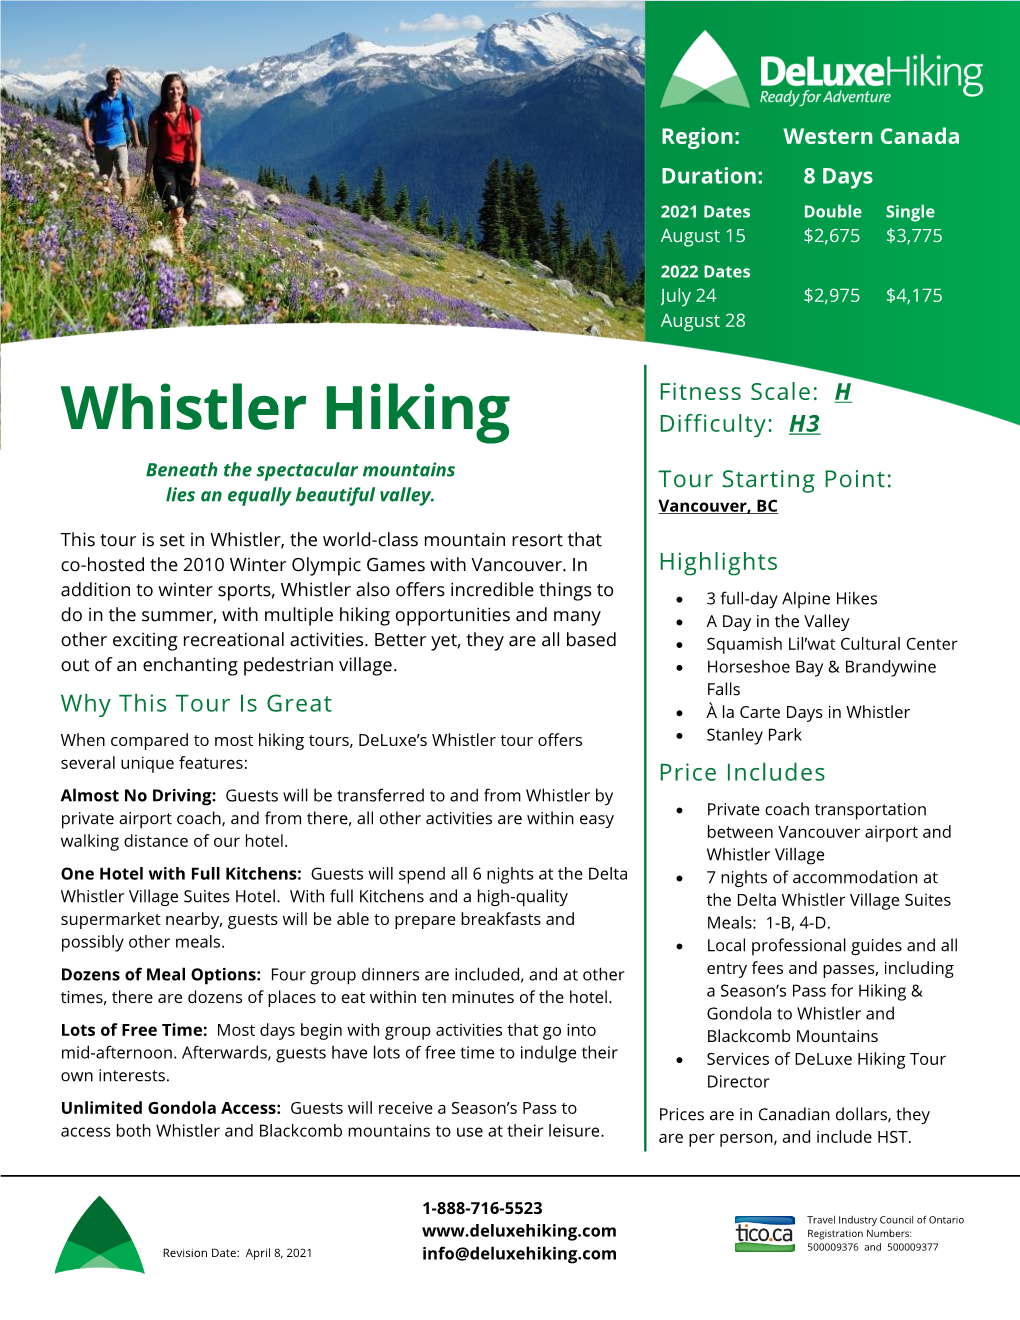 Whistler Hiking Difficulty: H3